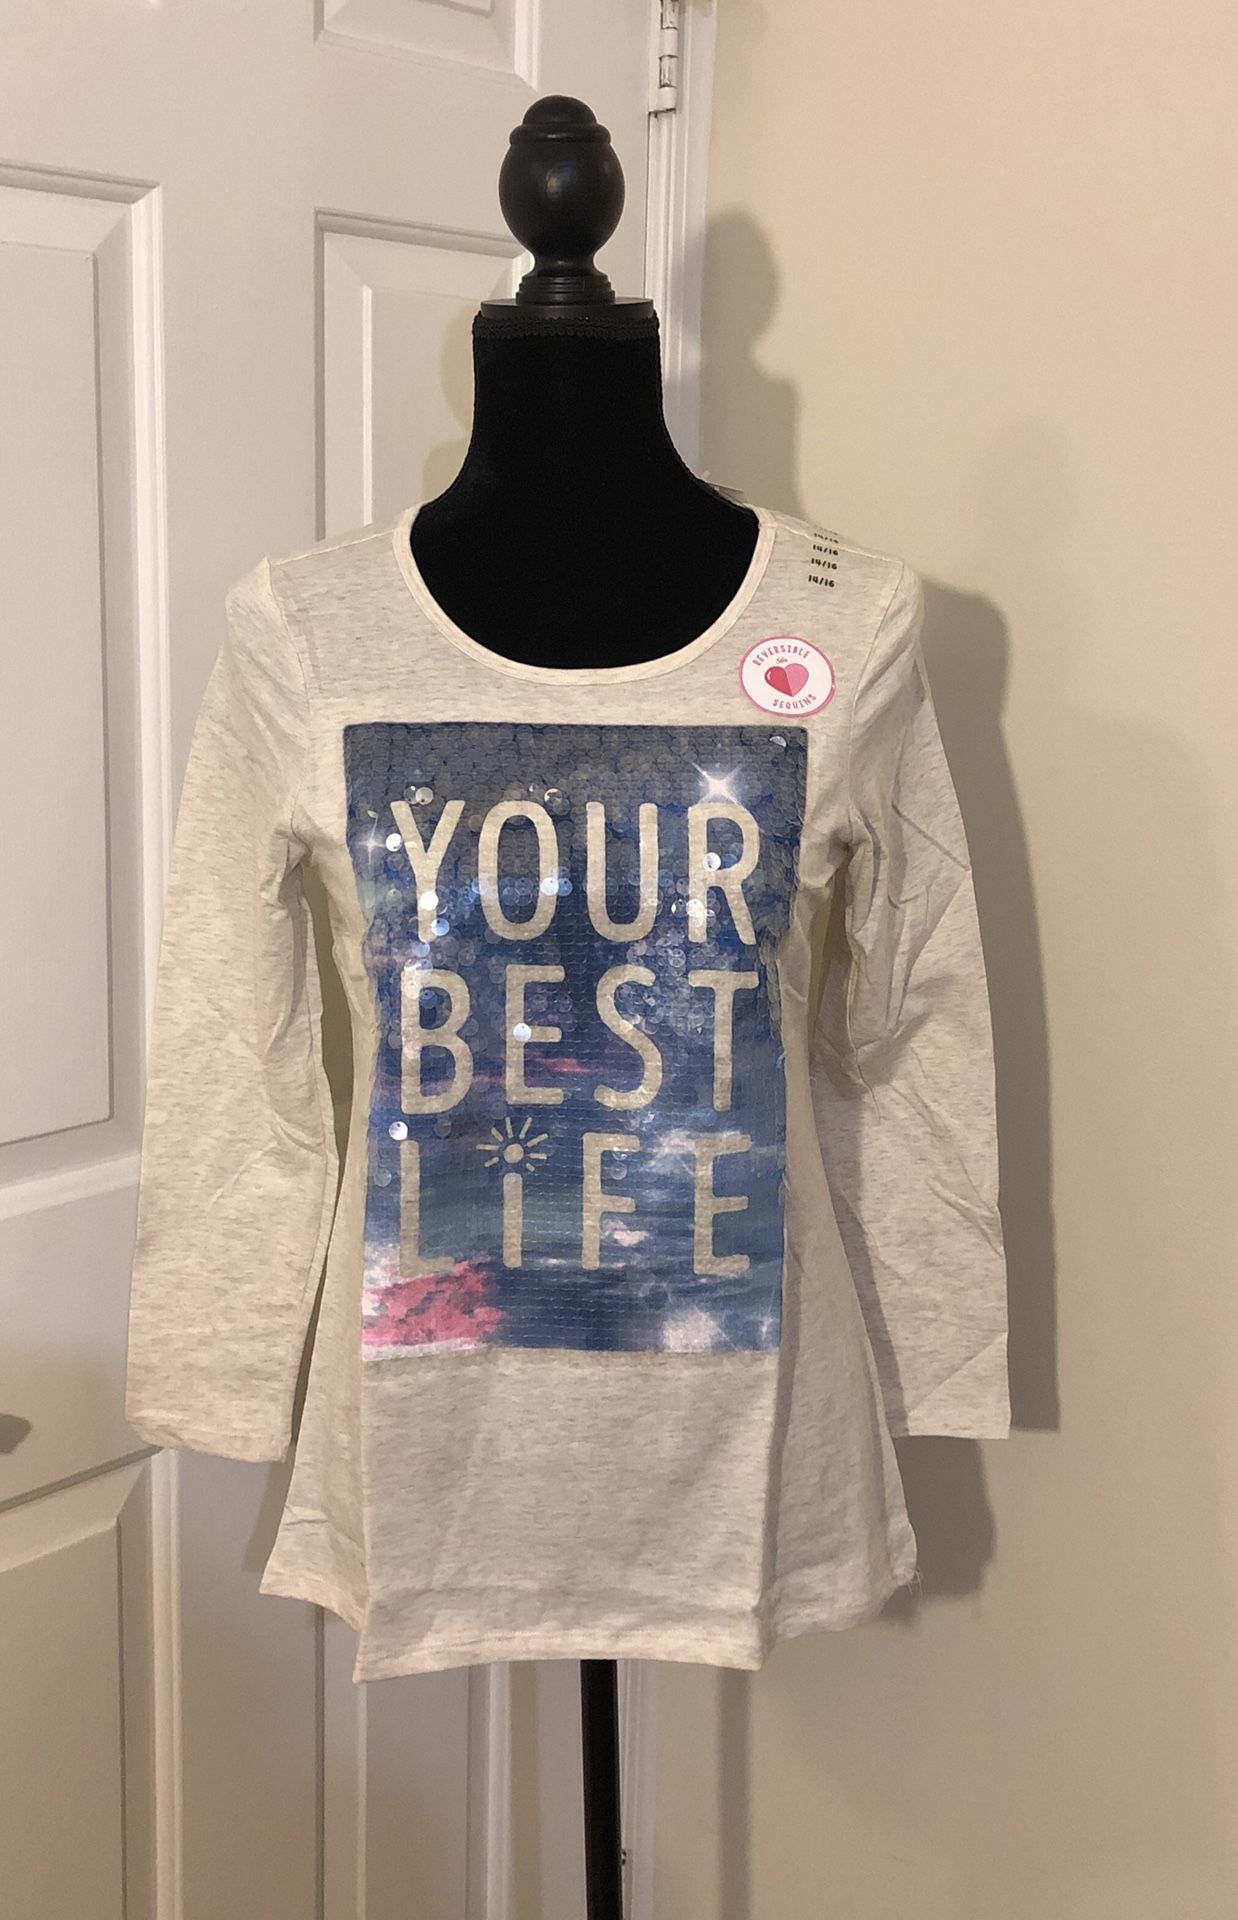 Justice “Your Best Life” Shirt..Girls Size 14/16...RTP. $26 Cream With Reversible Sequins...